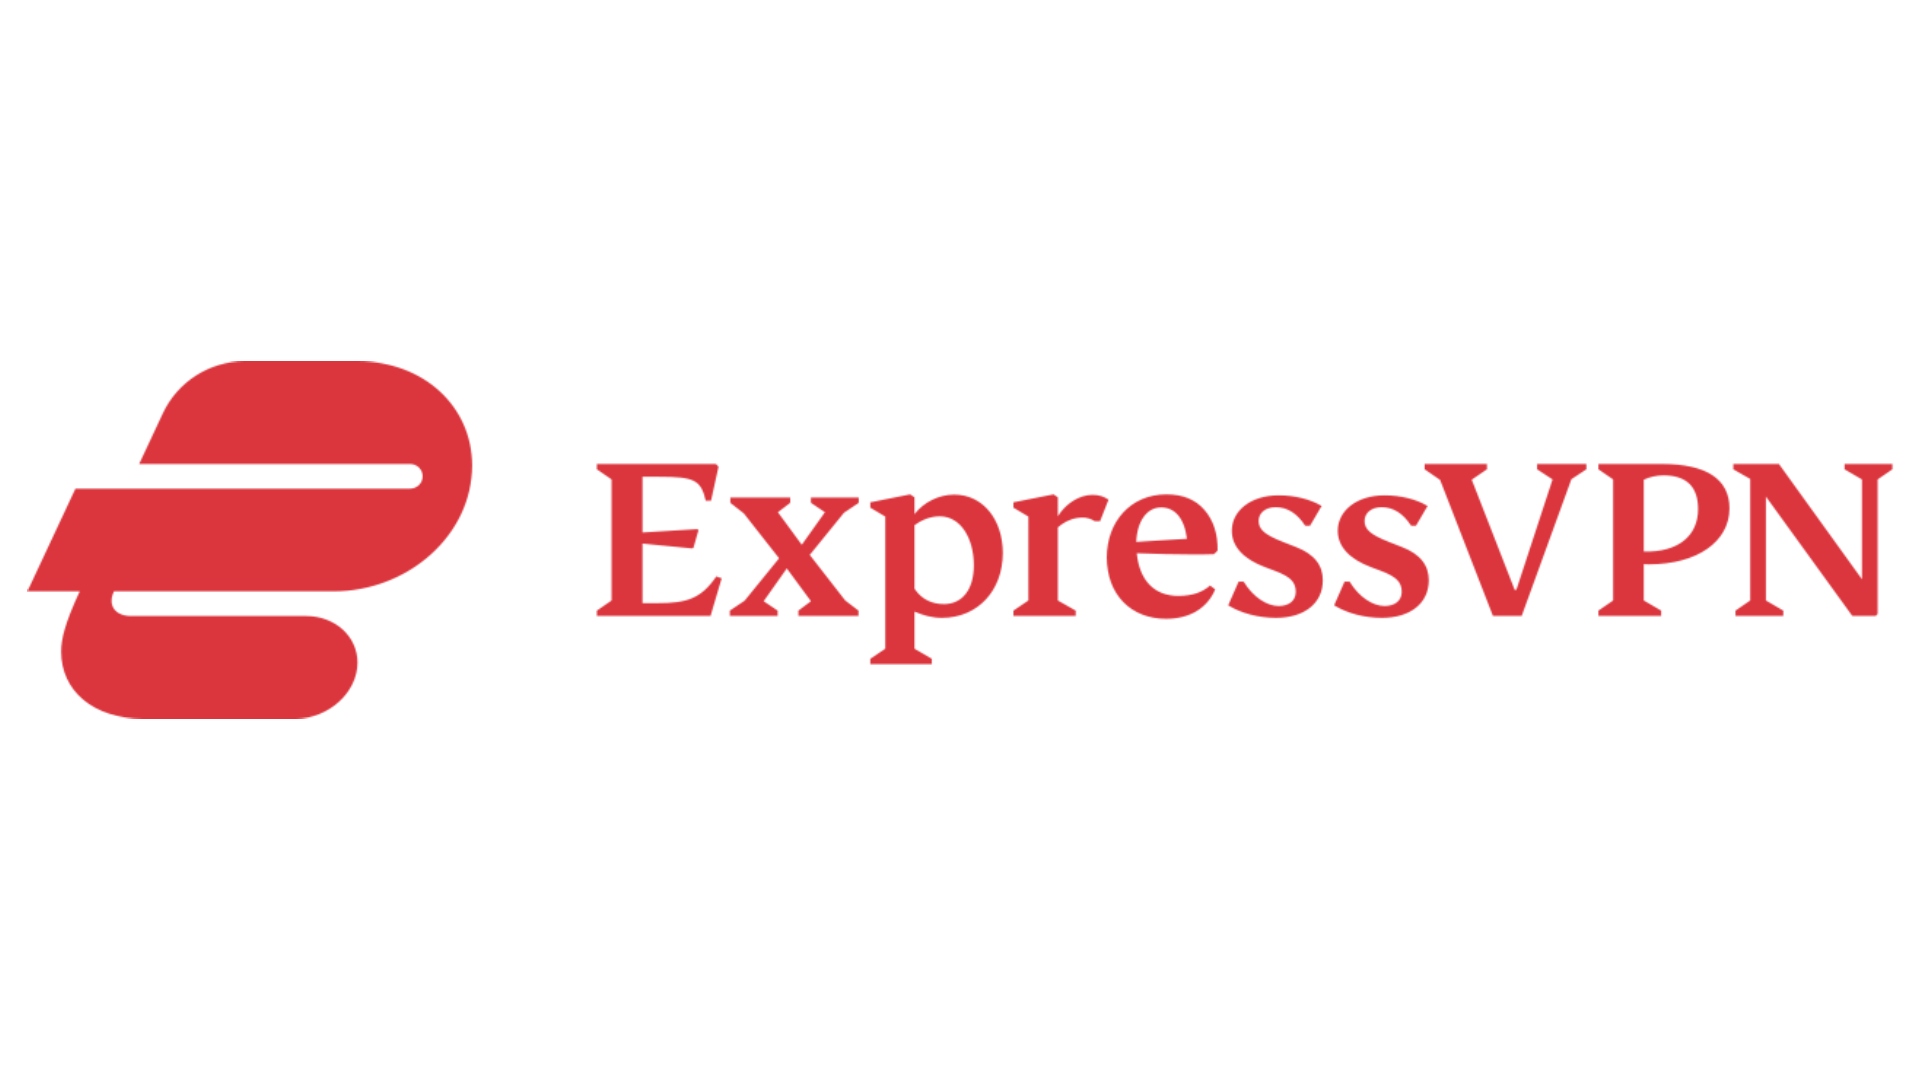 VPN costs for ExpressVPN. Image shows the company logo.